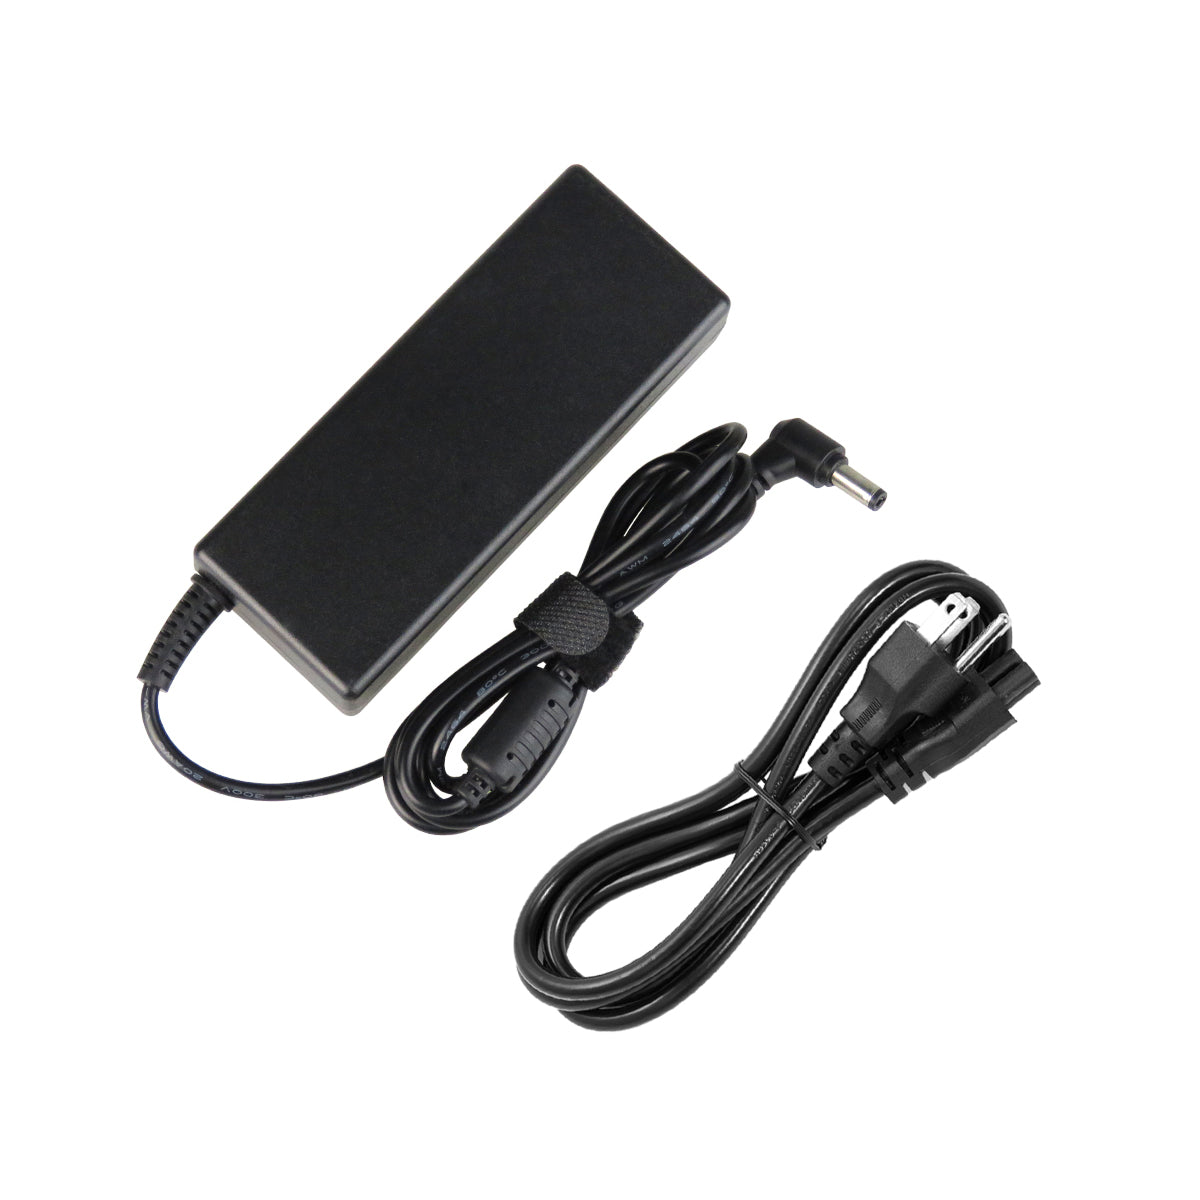 AC Adapter Charger for ASUS A45VS Notebook.